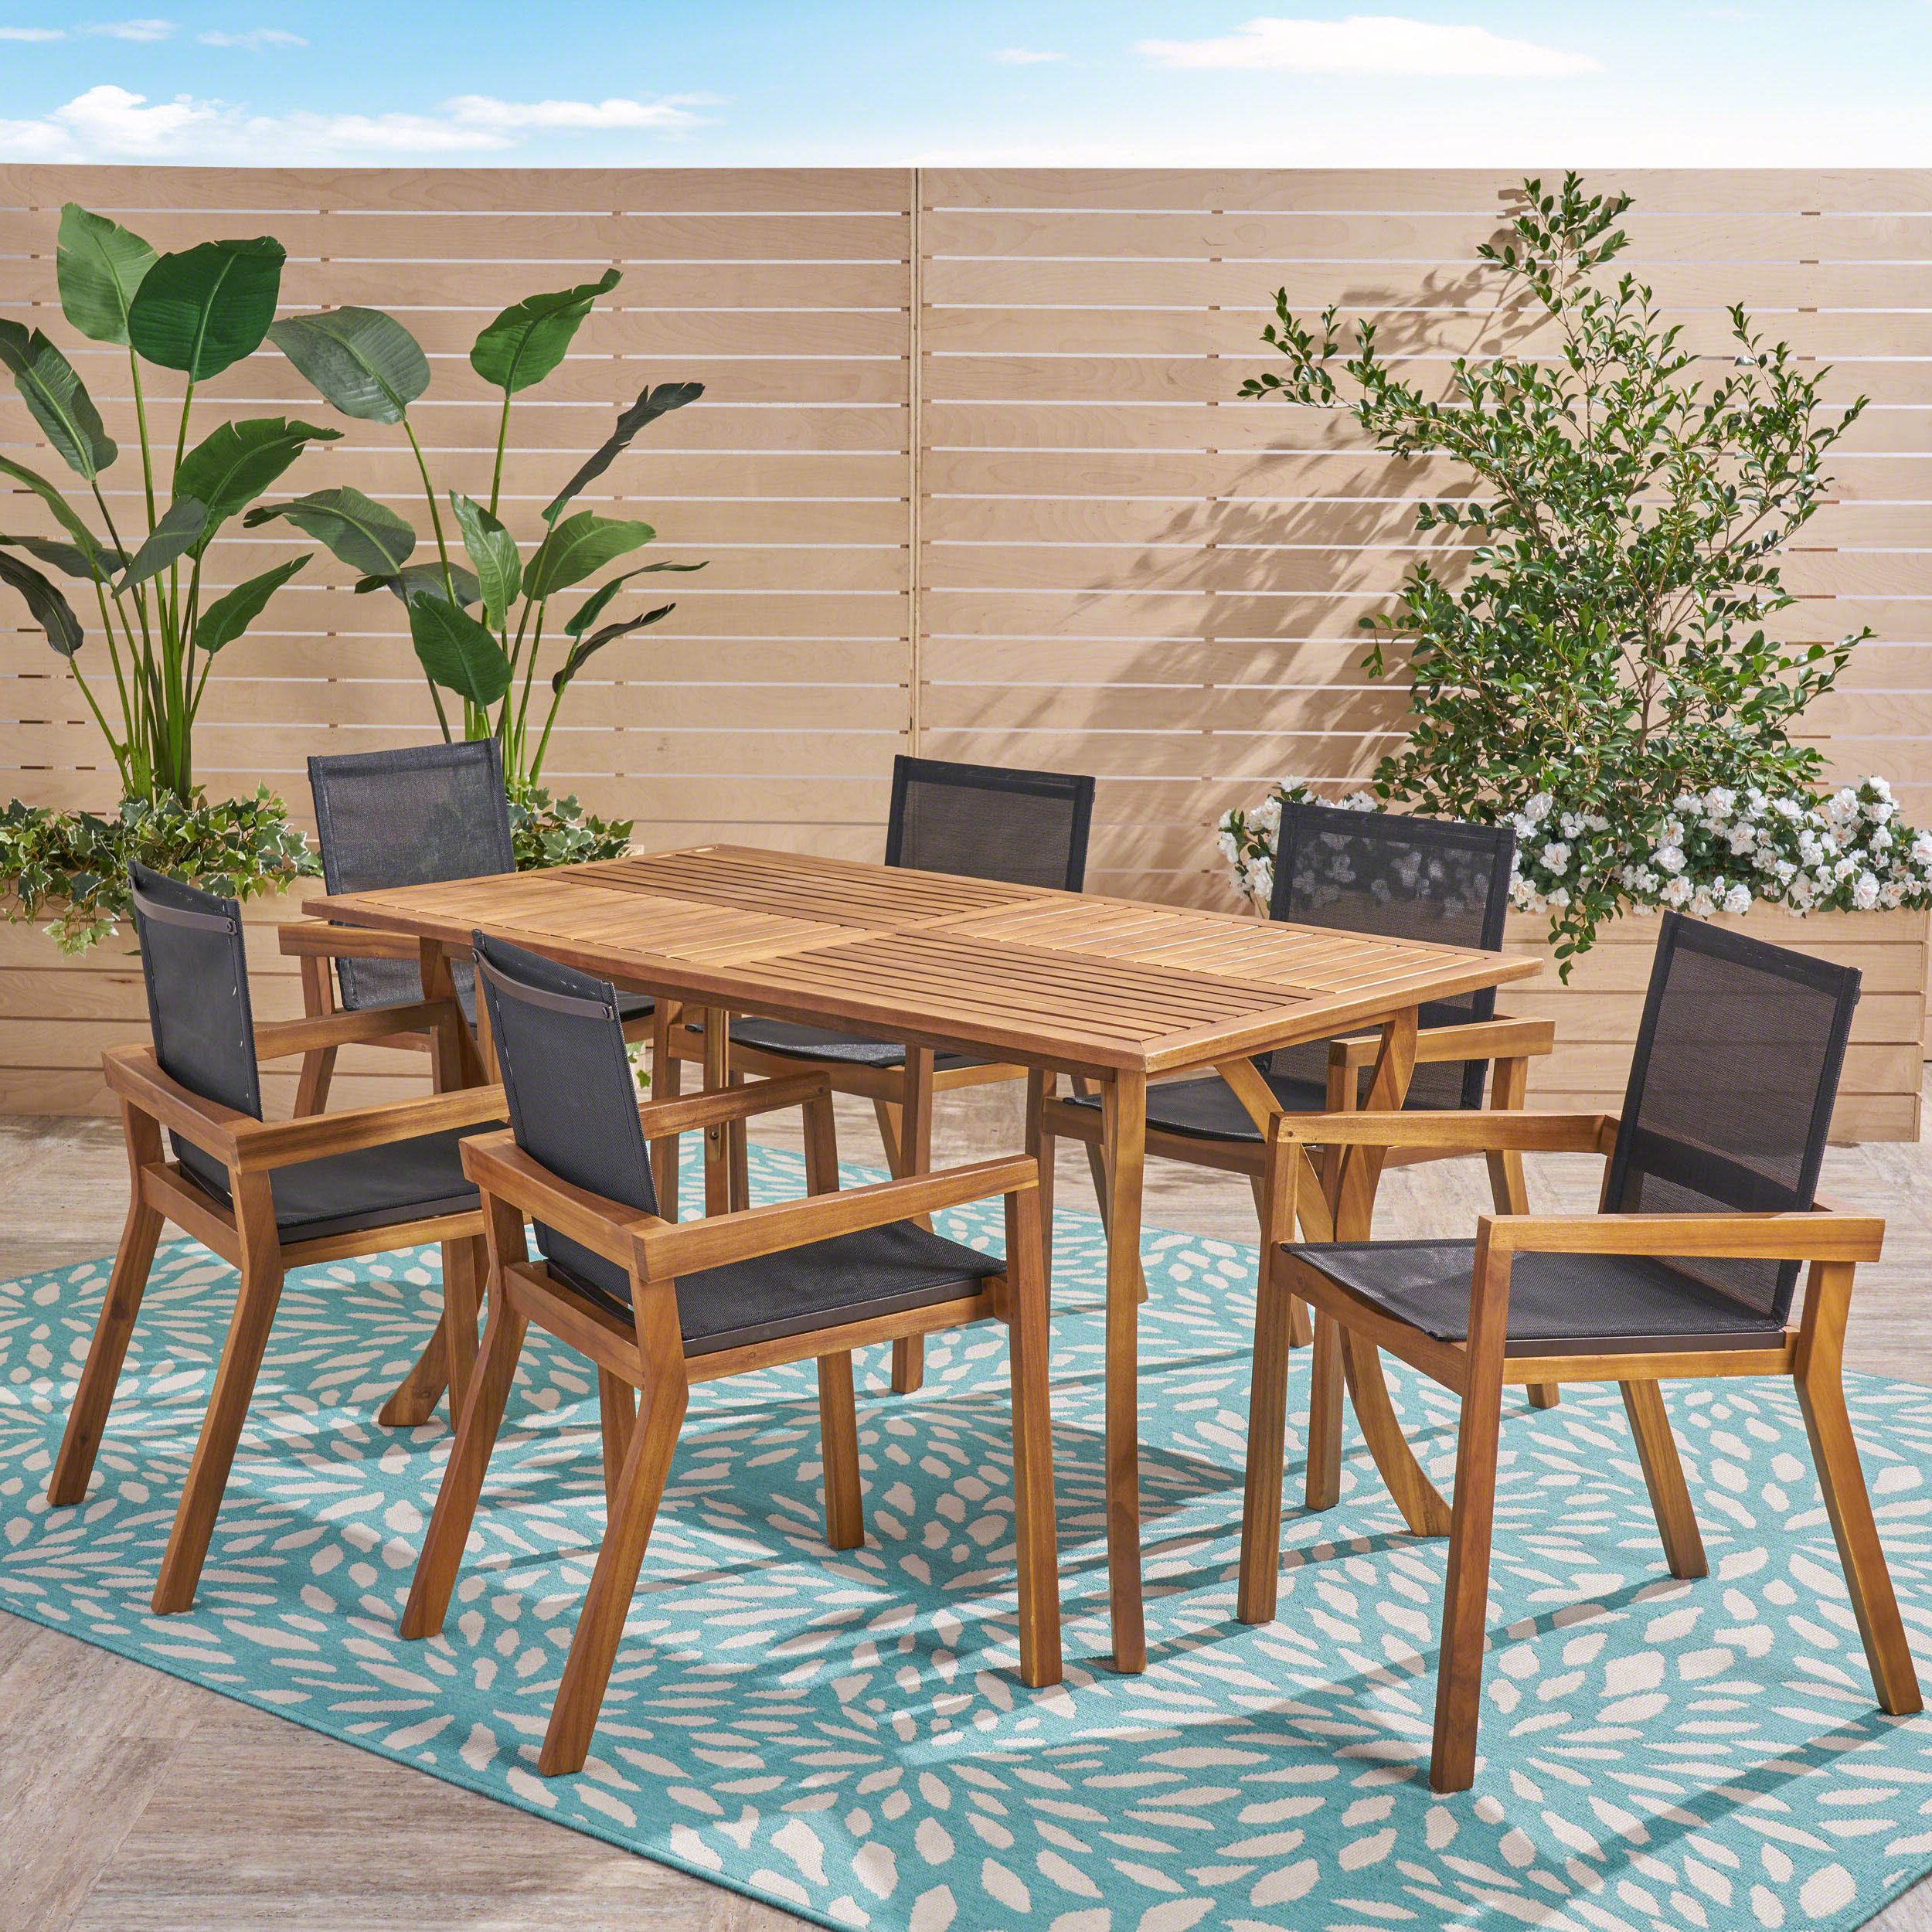 Popular Kaur Outdoor Acacia Wood 7 Piece Dining Set With Mesh Seats, Teak And In Acacia Wood Outdoor Seating Patio Sets (View 4 of 15)